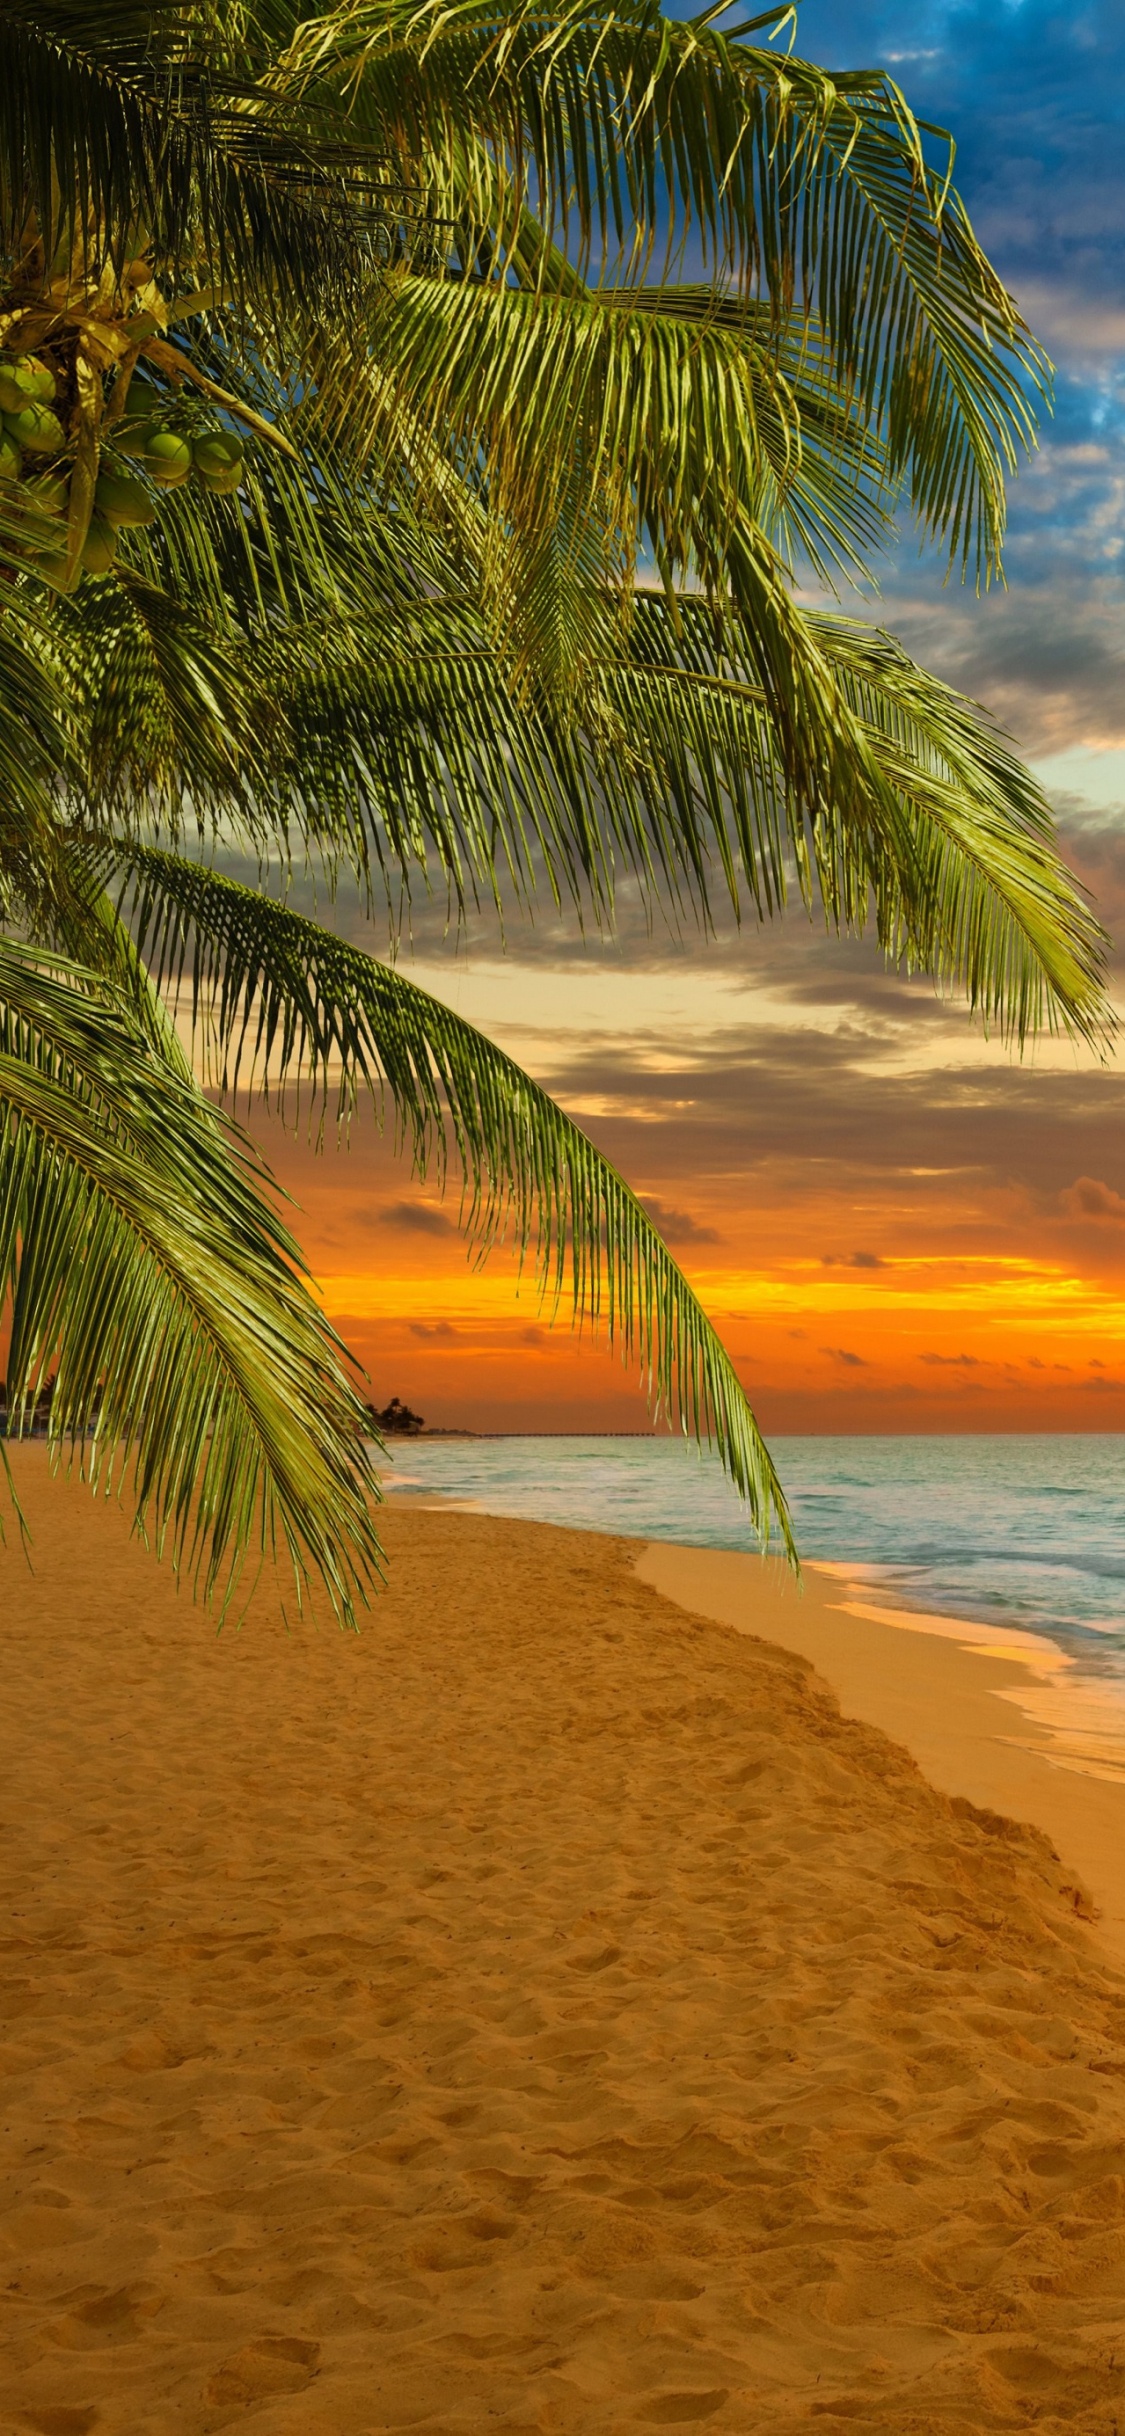 Palm Tree on Beach Shore During Sunset. Wallpaper in 1125x2436 Resolution